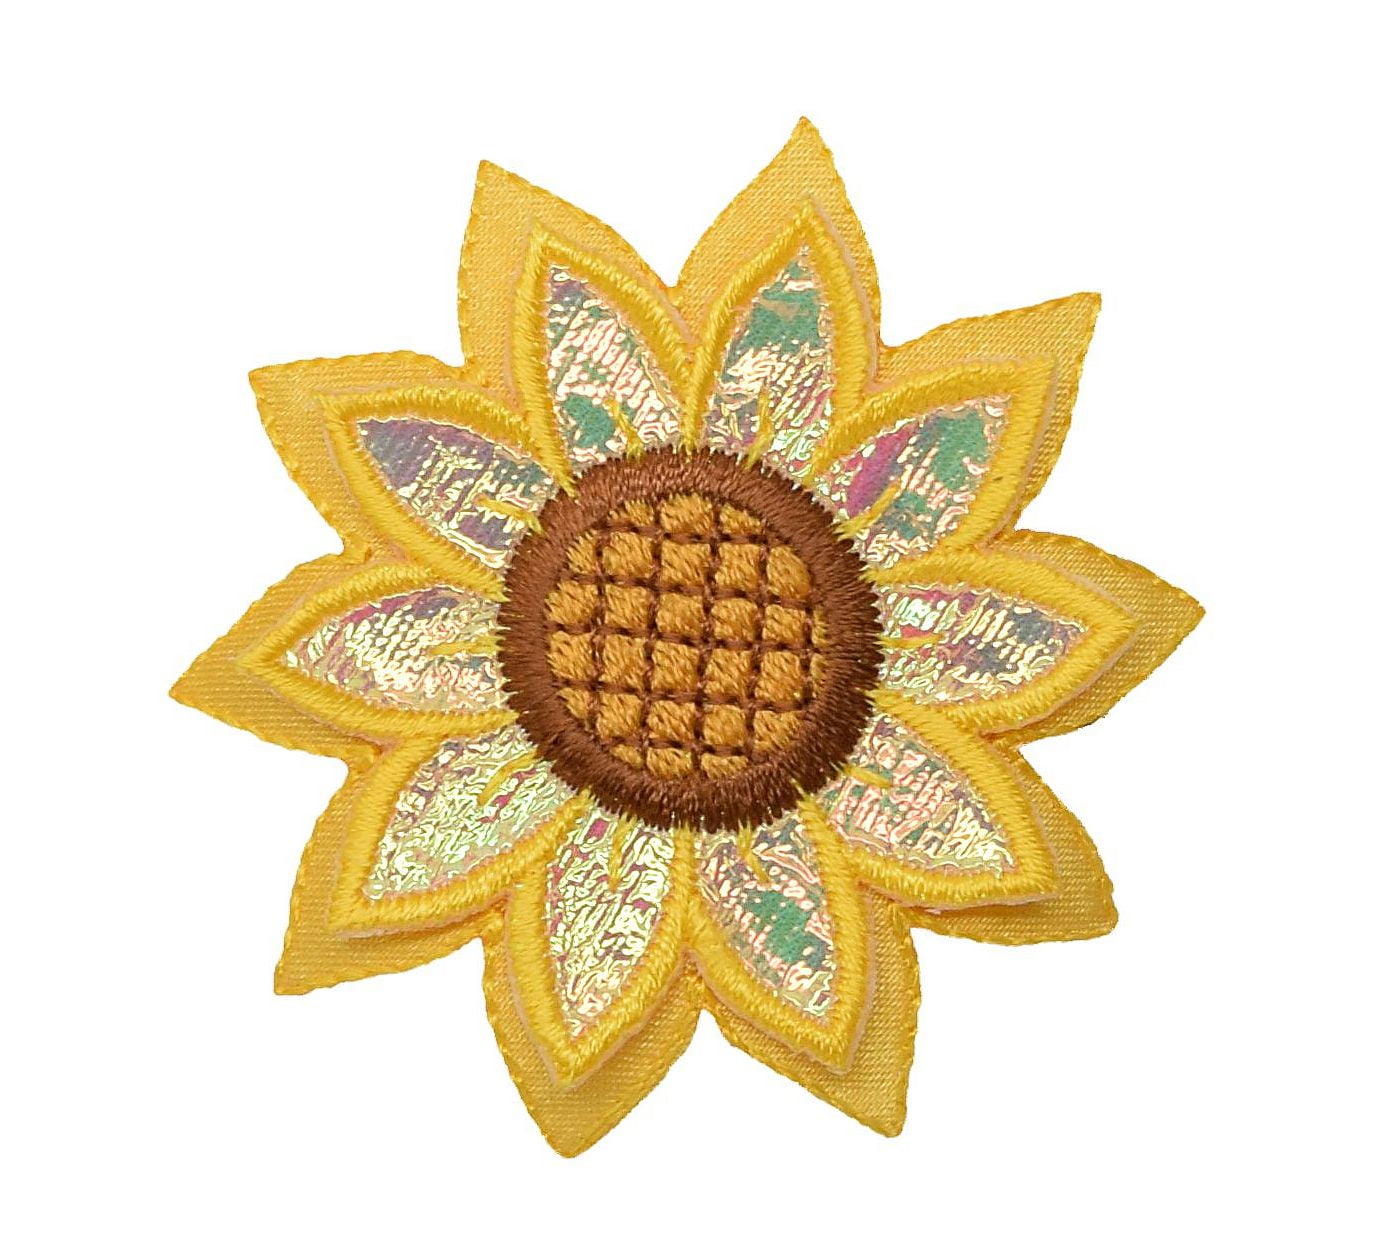 Sew On Full Embroidered Patch Appliqués Badge Sunflower Iron 